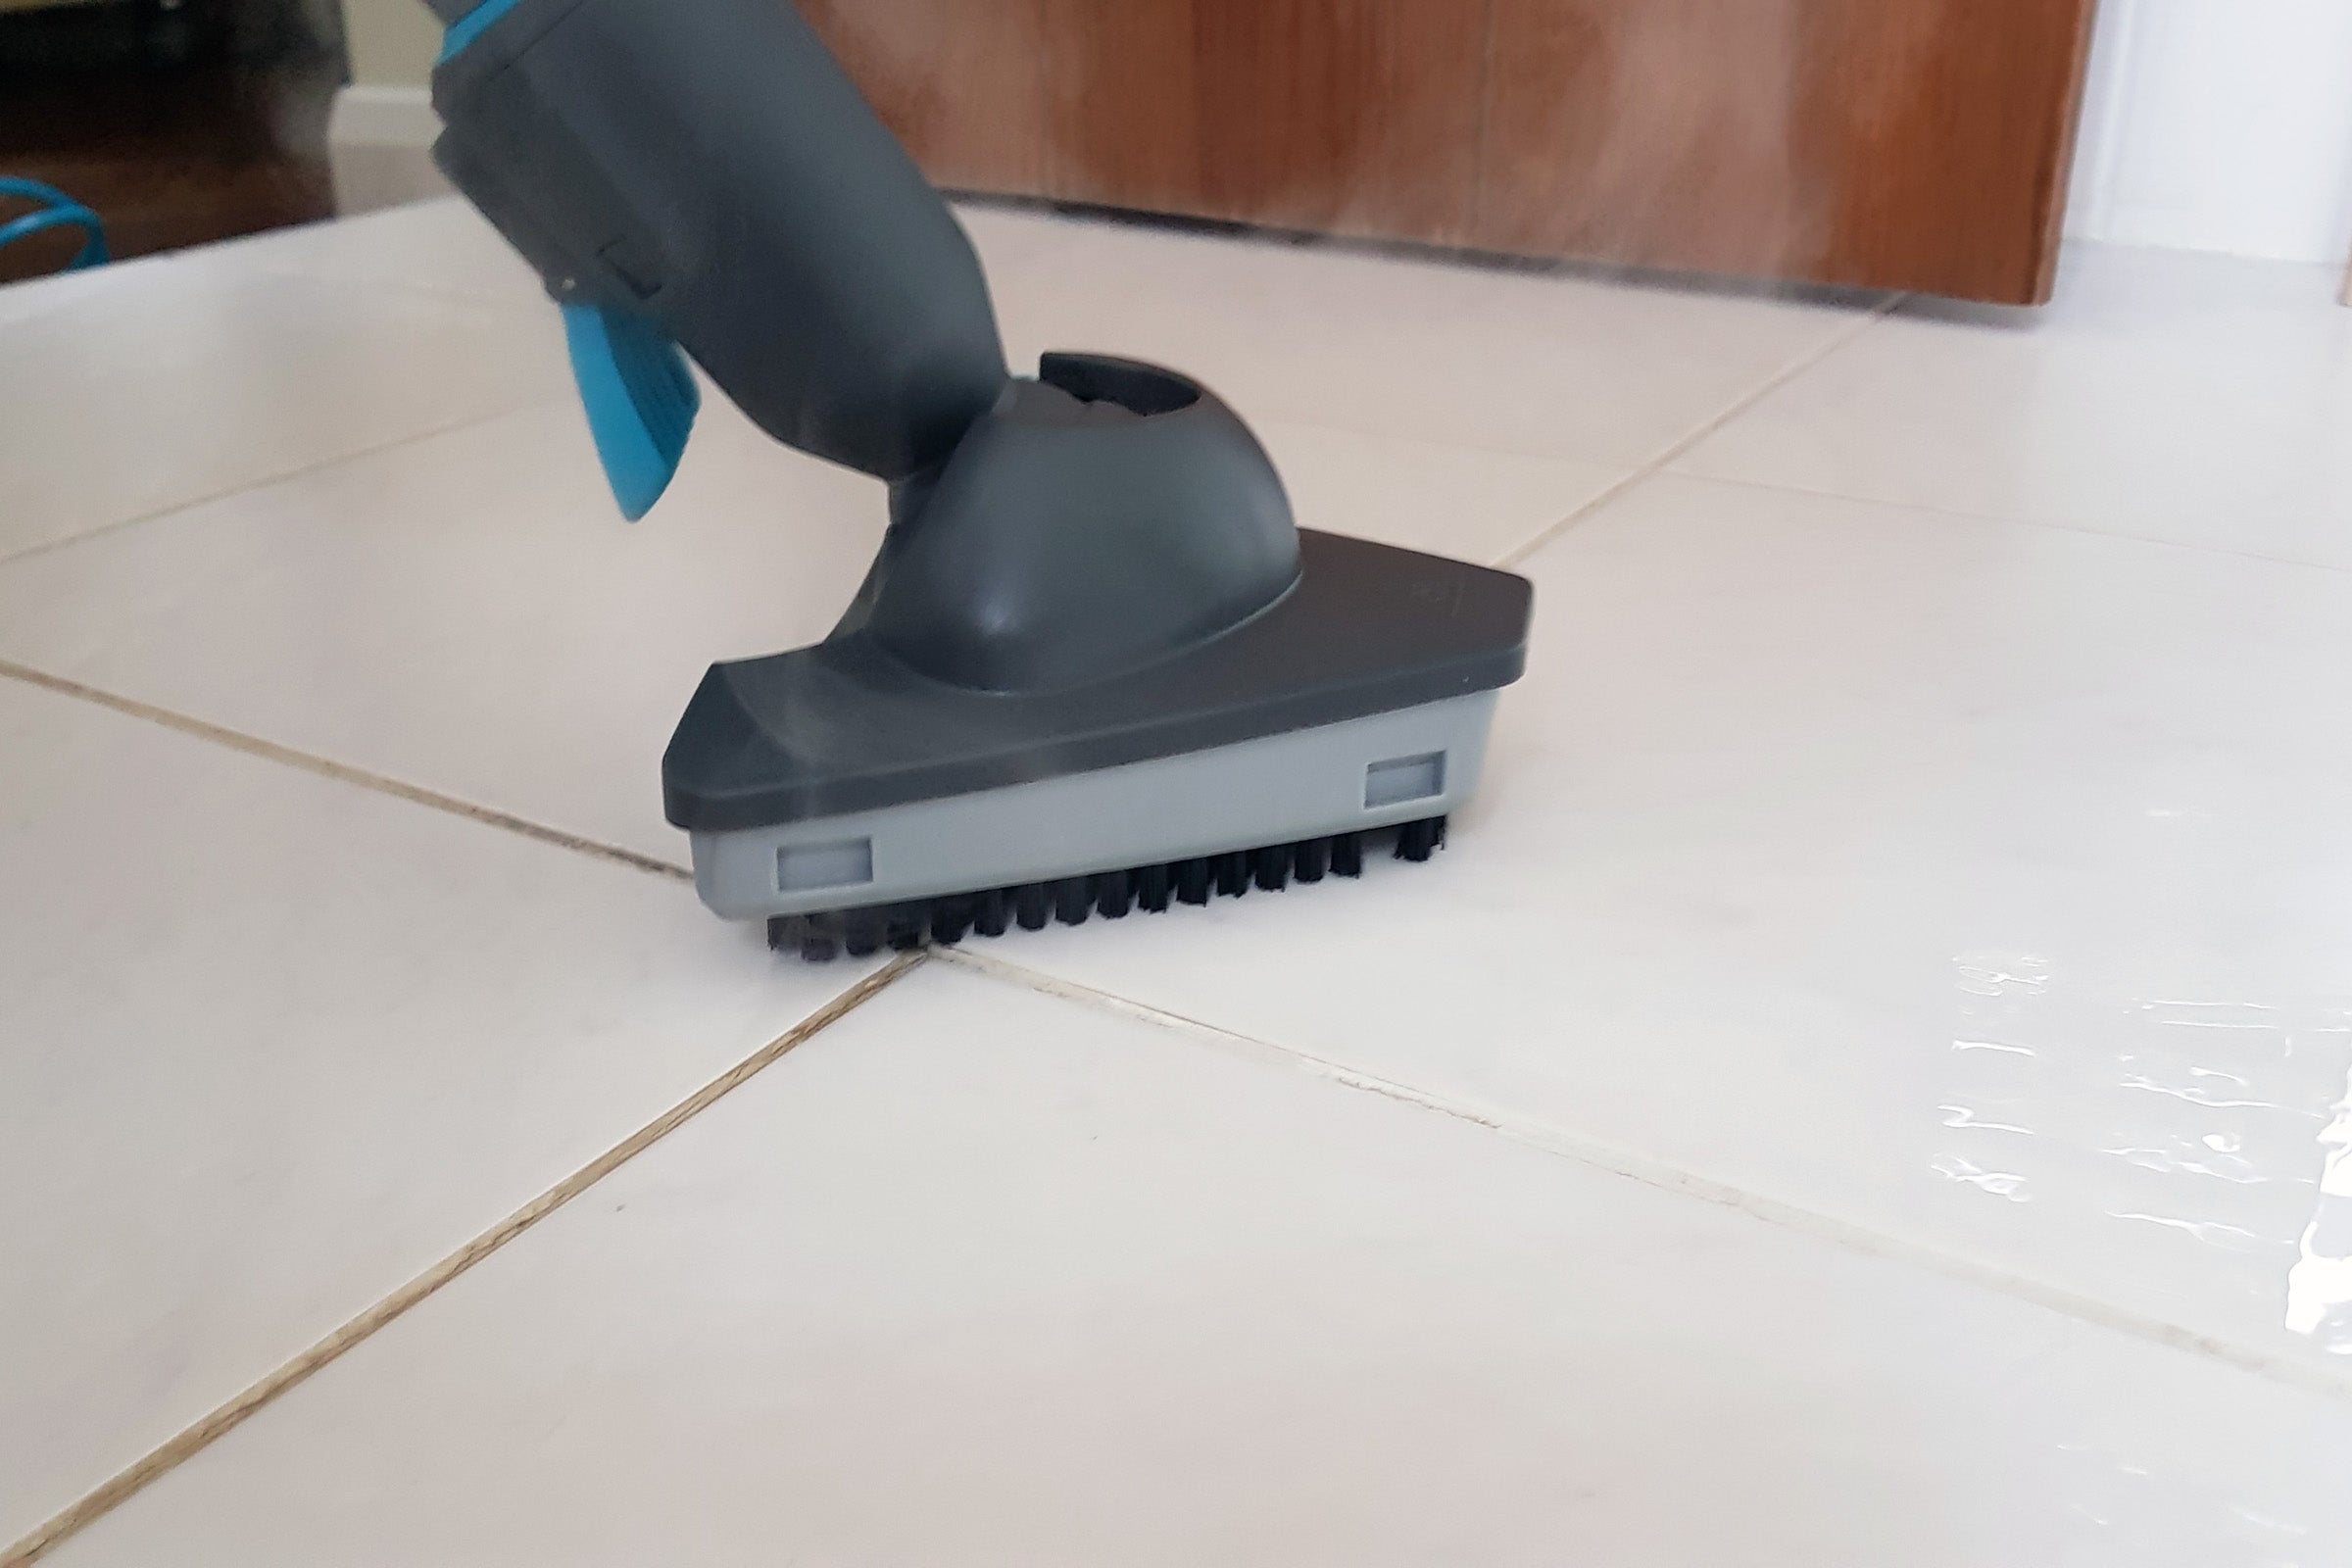 A Vax SteamFresh S82 vaccum cleaner's cleaning unit held in hand